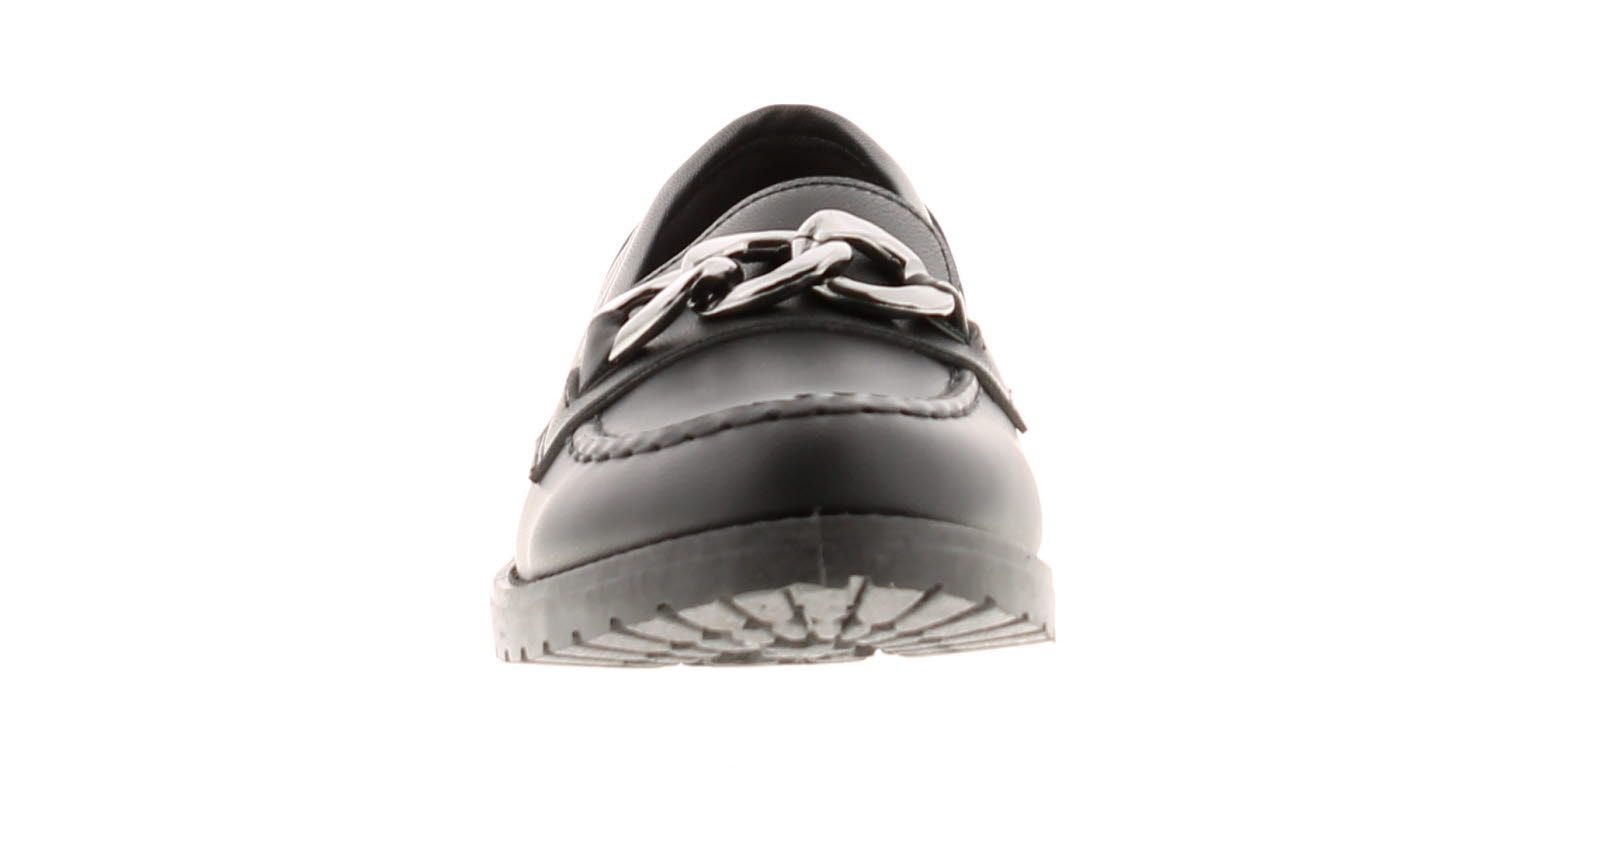 Miss Riot Sophie Older Girls School Shoes Black. Manmade Upper. Fabric Lining. Synthetic Sole. Older Girls Synthetic Loafer Chunky Metal Chain Trim.